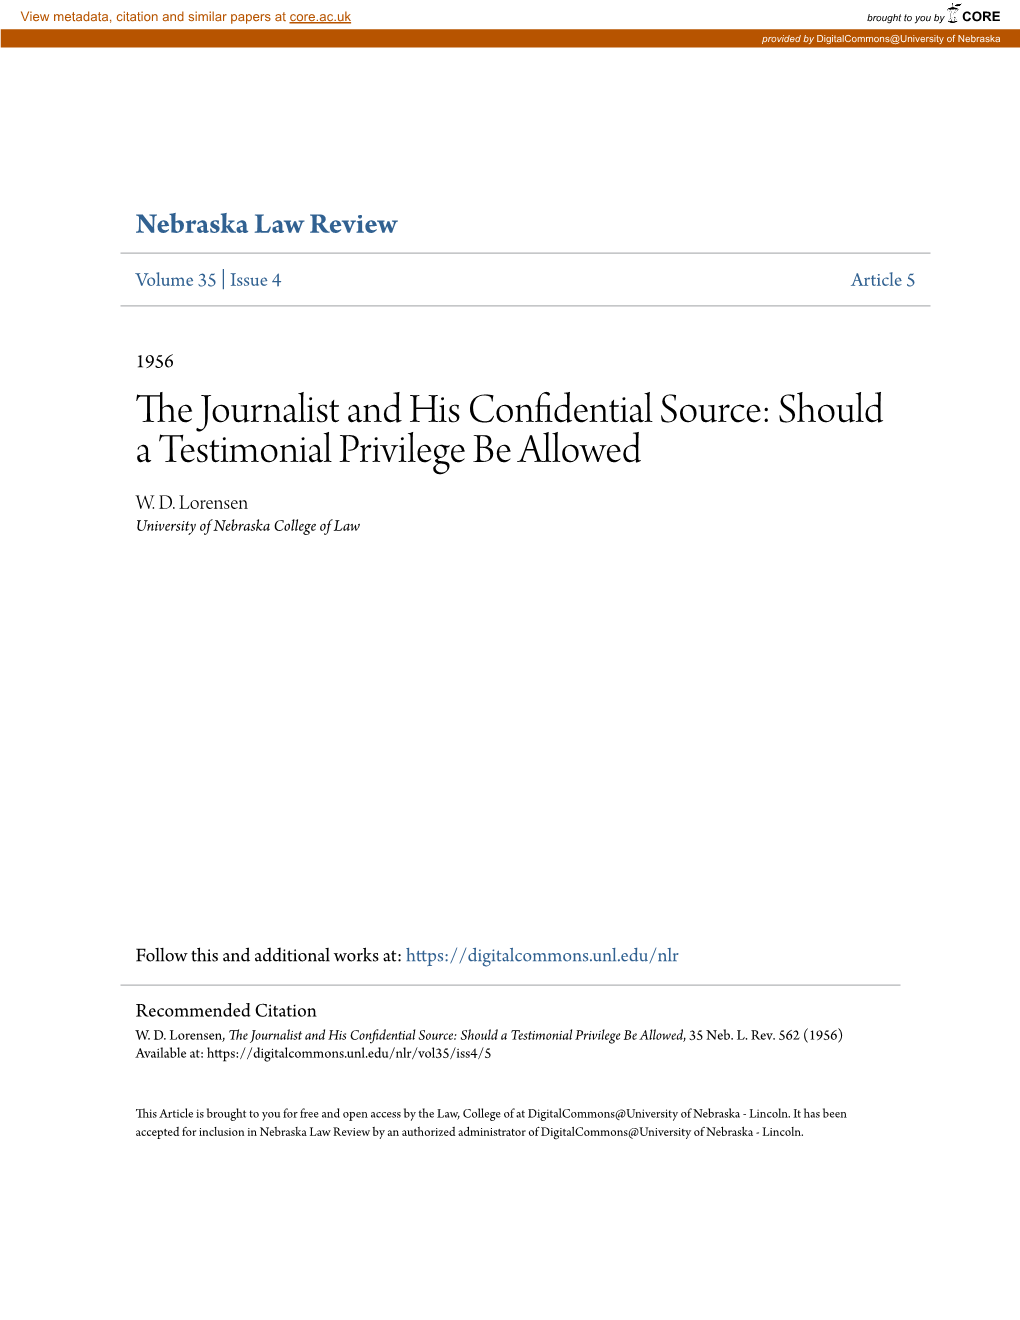 The Journalist and His Confidential Source: Should a Testimonial Privilege Be Allowed, 35 Neb